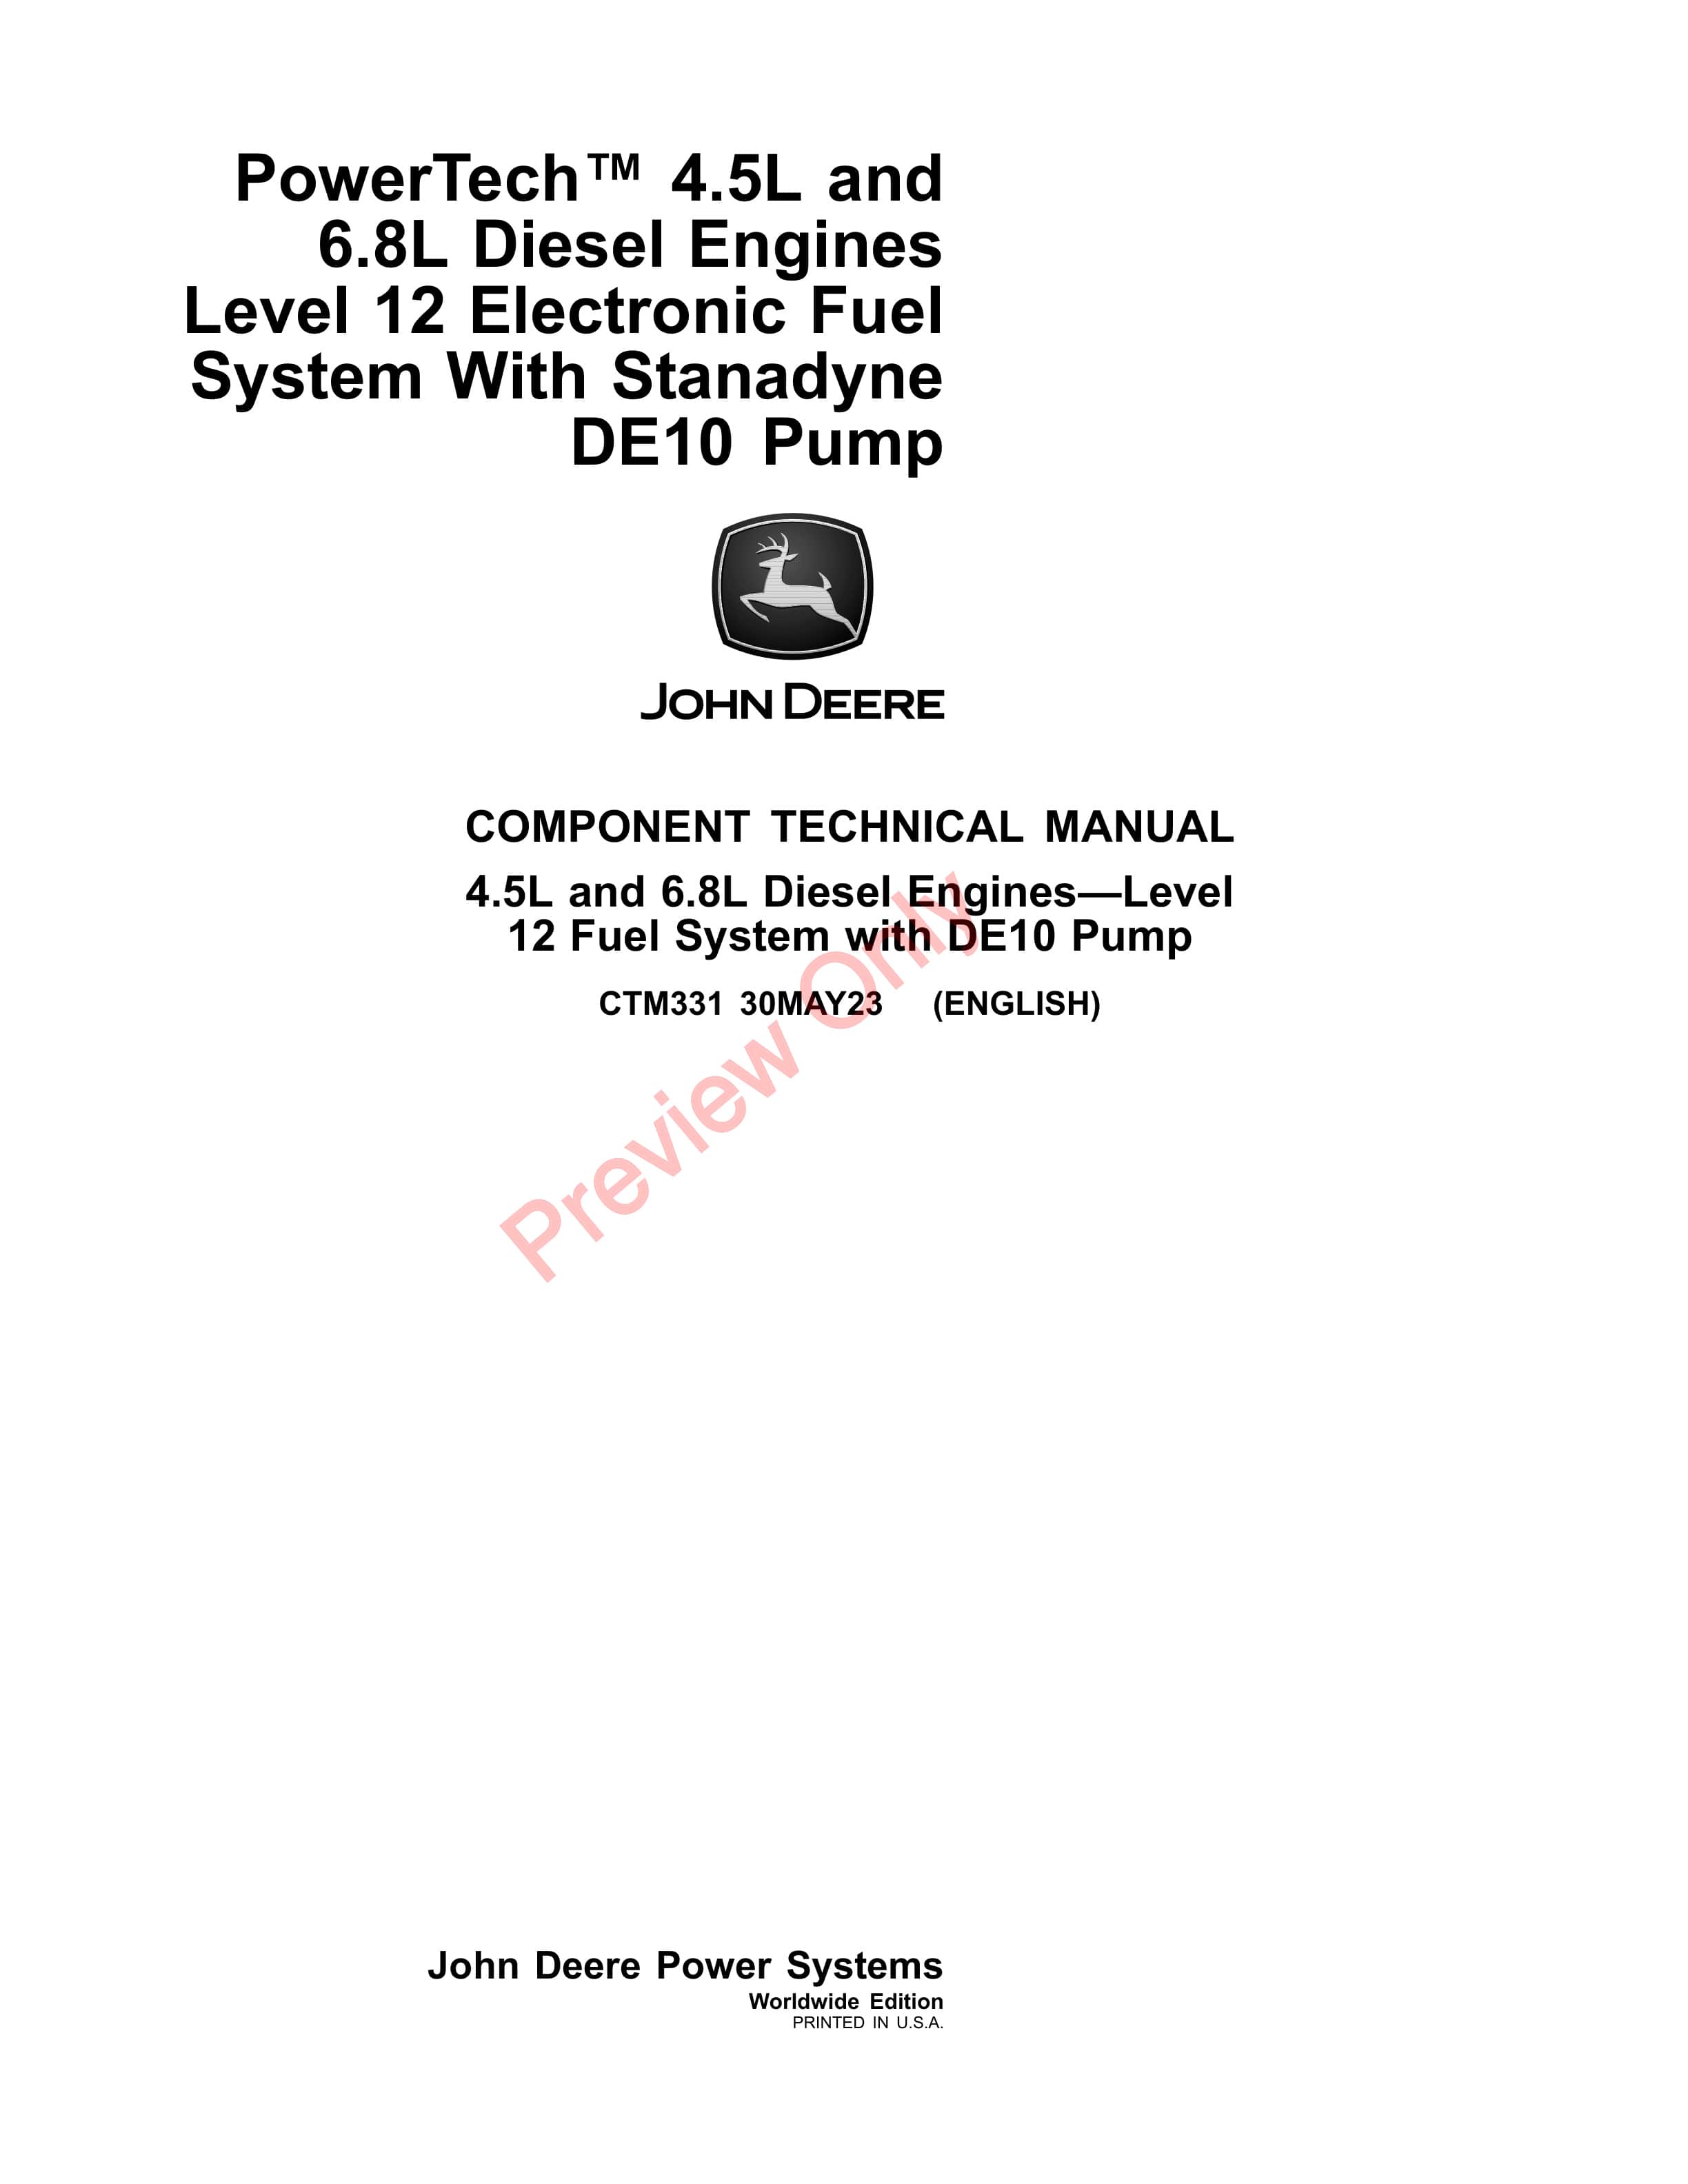 John Deere PowerTech 4.5L and 6.8L Diesel Engines Level 12 Electronic Fuel System With Stanadyne DE10 Pump Component Technical Manual CTM331 30MAY23 PDF